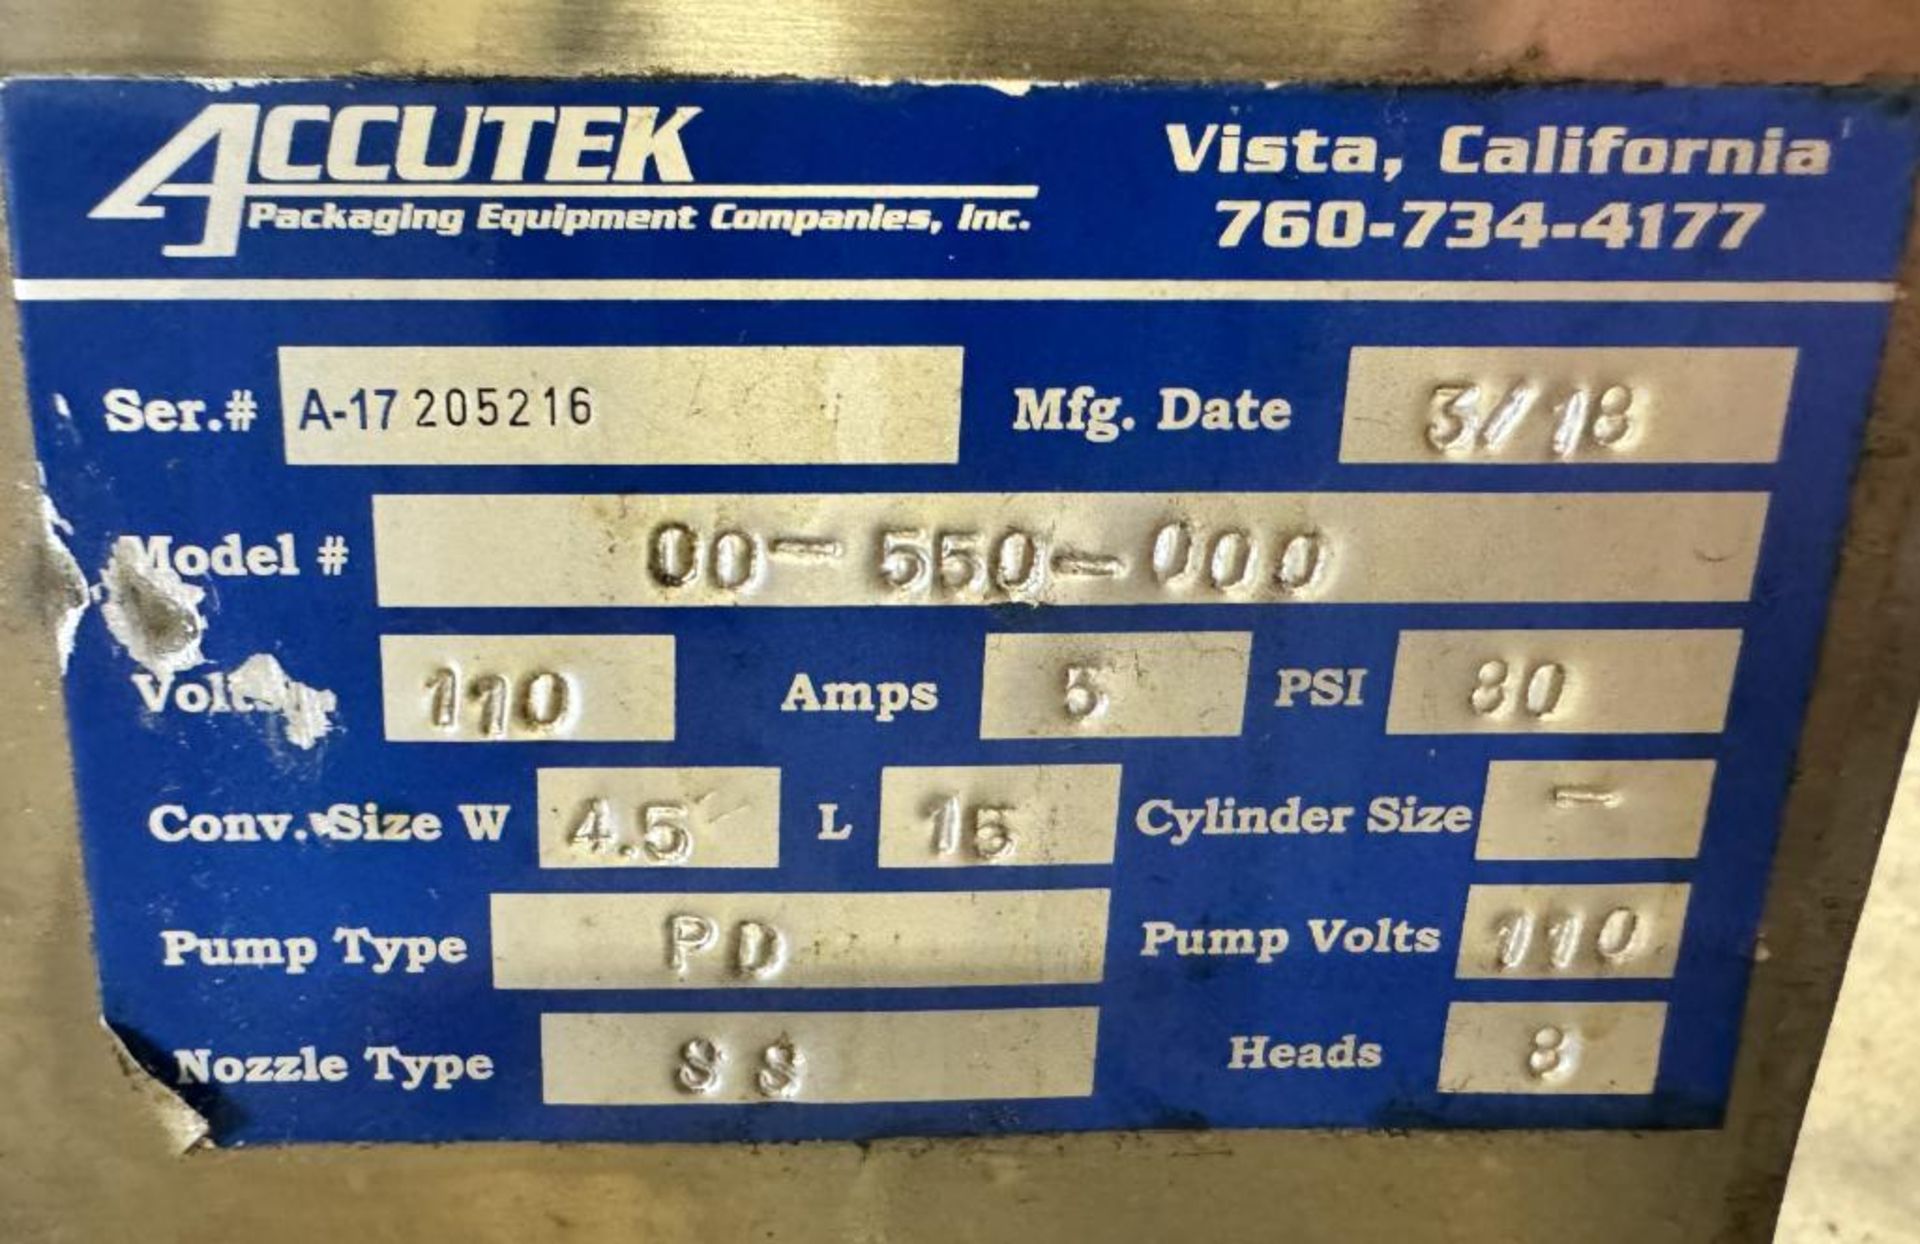 Accutek Packaging Equipment Auto Pinch Series (8) Nozzle Filler, Model 00-550-000, Serial# A-17-2052 - Image 11 of 11